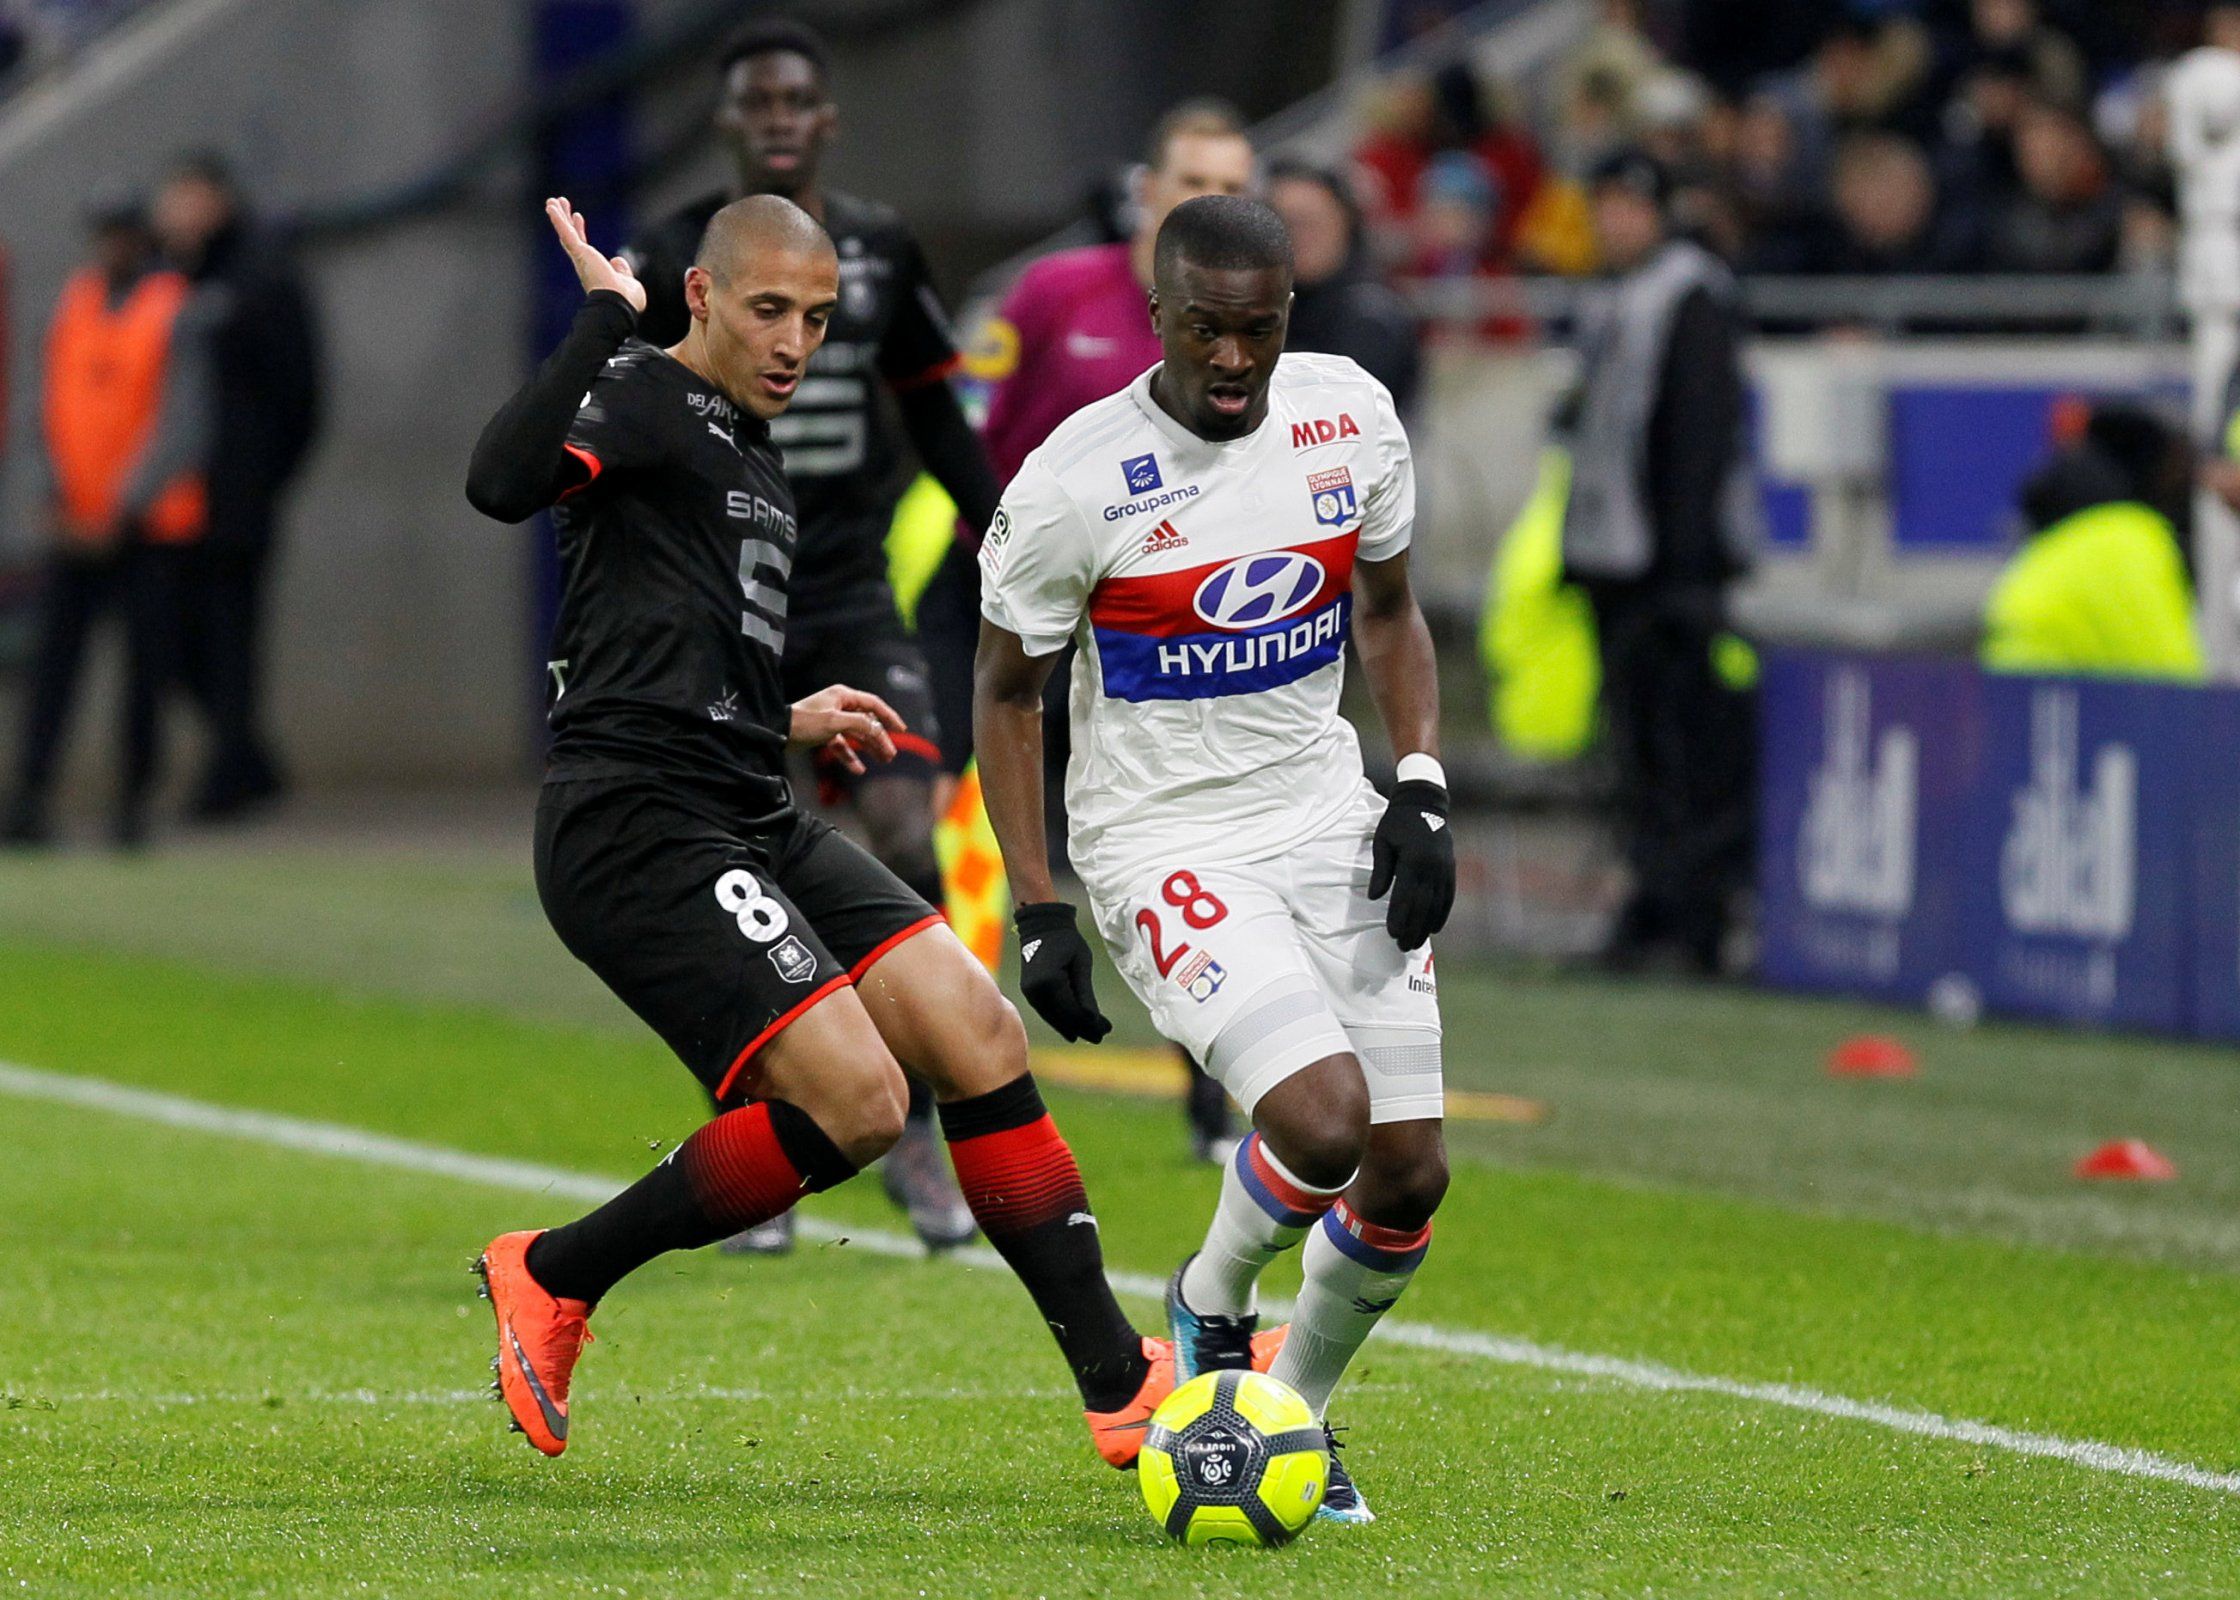 Tanguy Ndombele in action for Lyon against Rennes